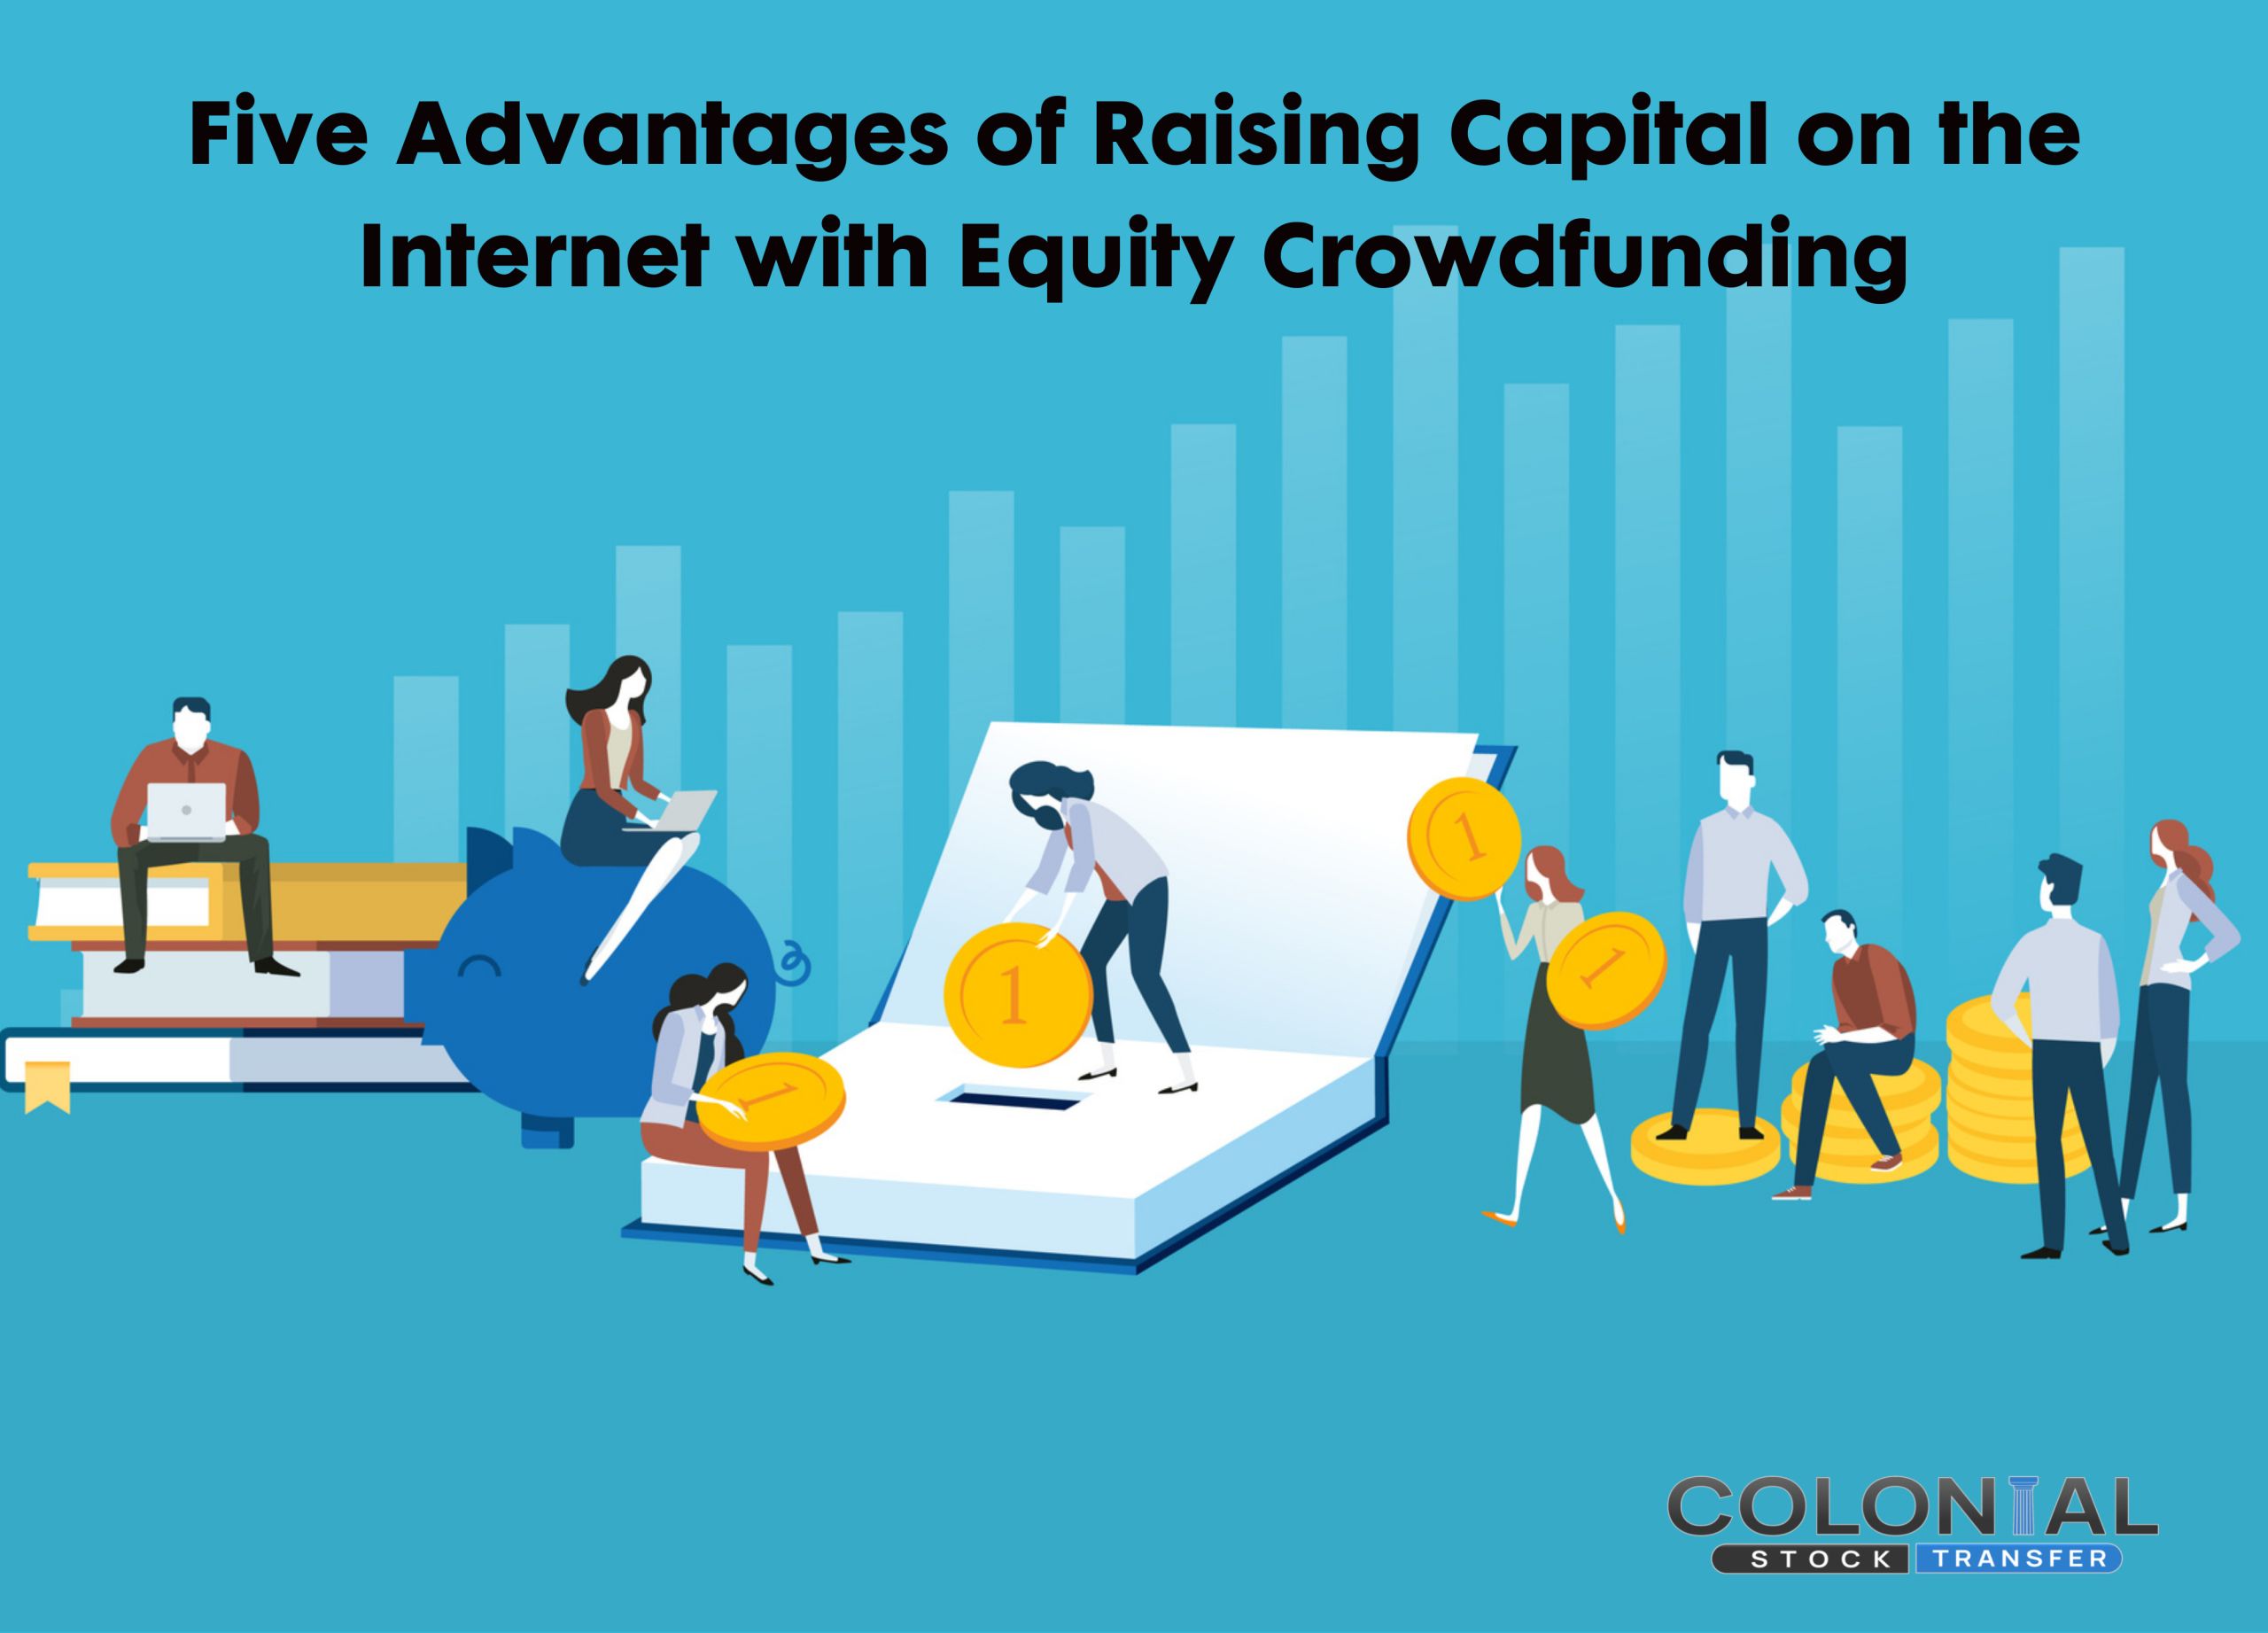 Five Advantages of Raising Capital on the Internet with Equity Crowdfunding